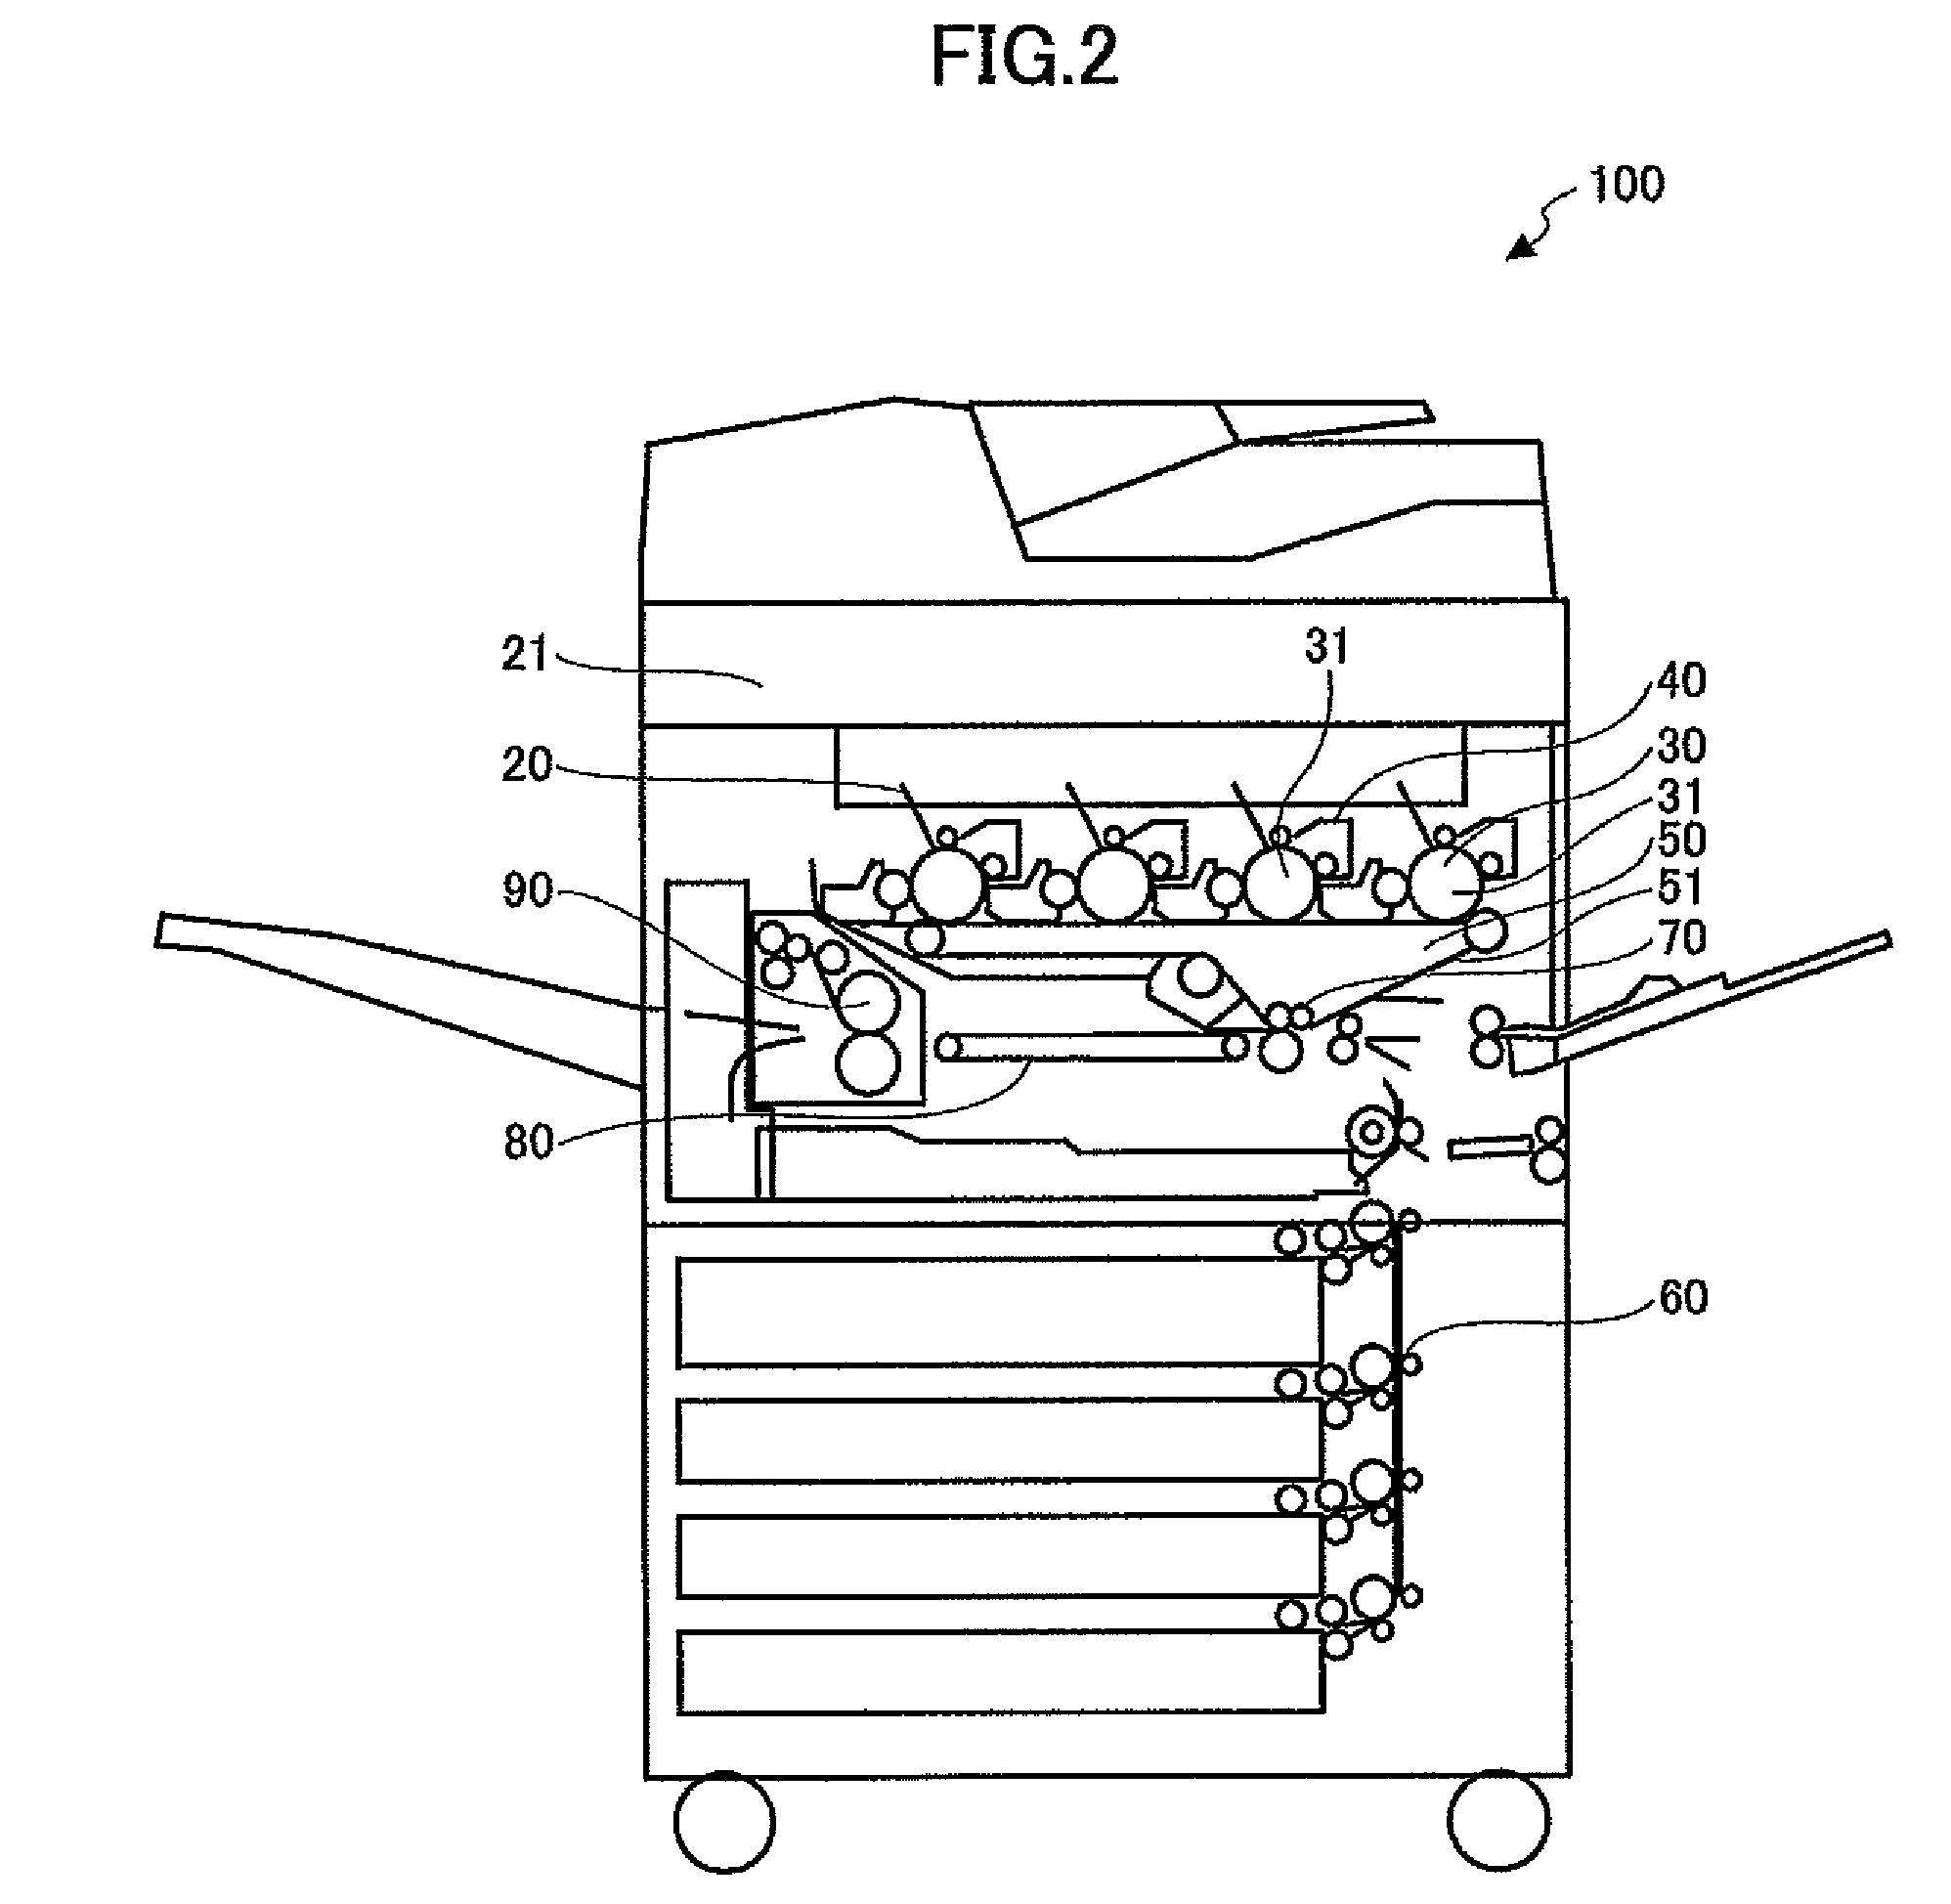 Image forming device adapted to control speed difference between first rotary member and second rotary member